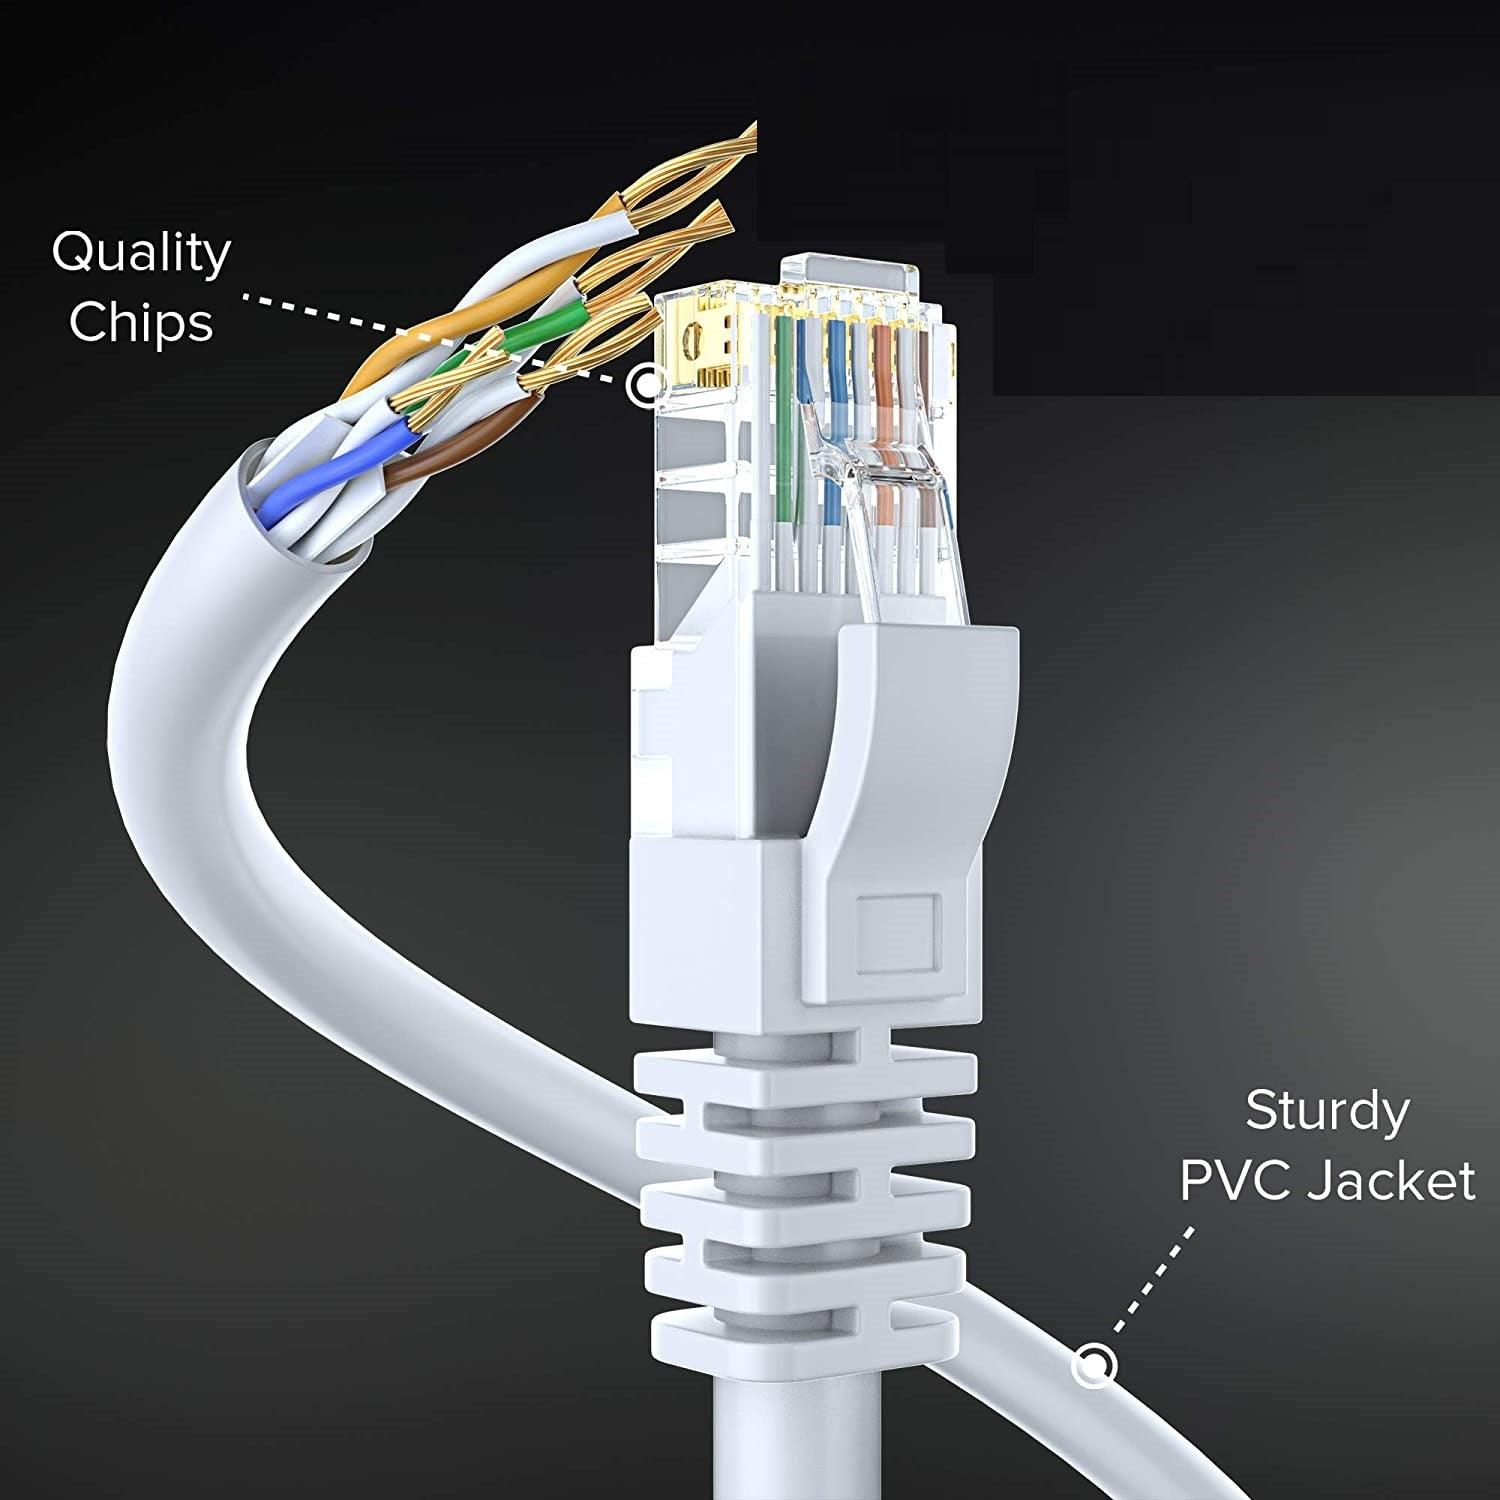 FEDUS Cat6 Ethernet Cable, High Speed 550Mhz 10 Gigabit Speed Utp Lan Cable, Network Cable Internet Cable Rj45 Cable Lan Wire, 6 Wires For Laptop, Pc, Television, Router, Modem-White Colour - FEDUS